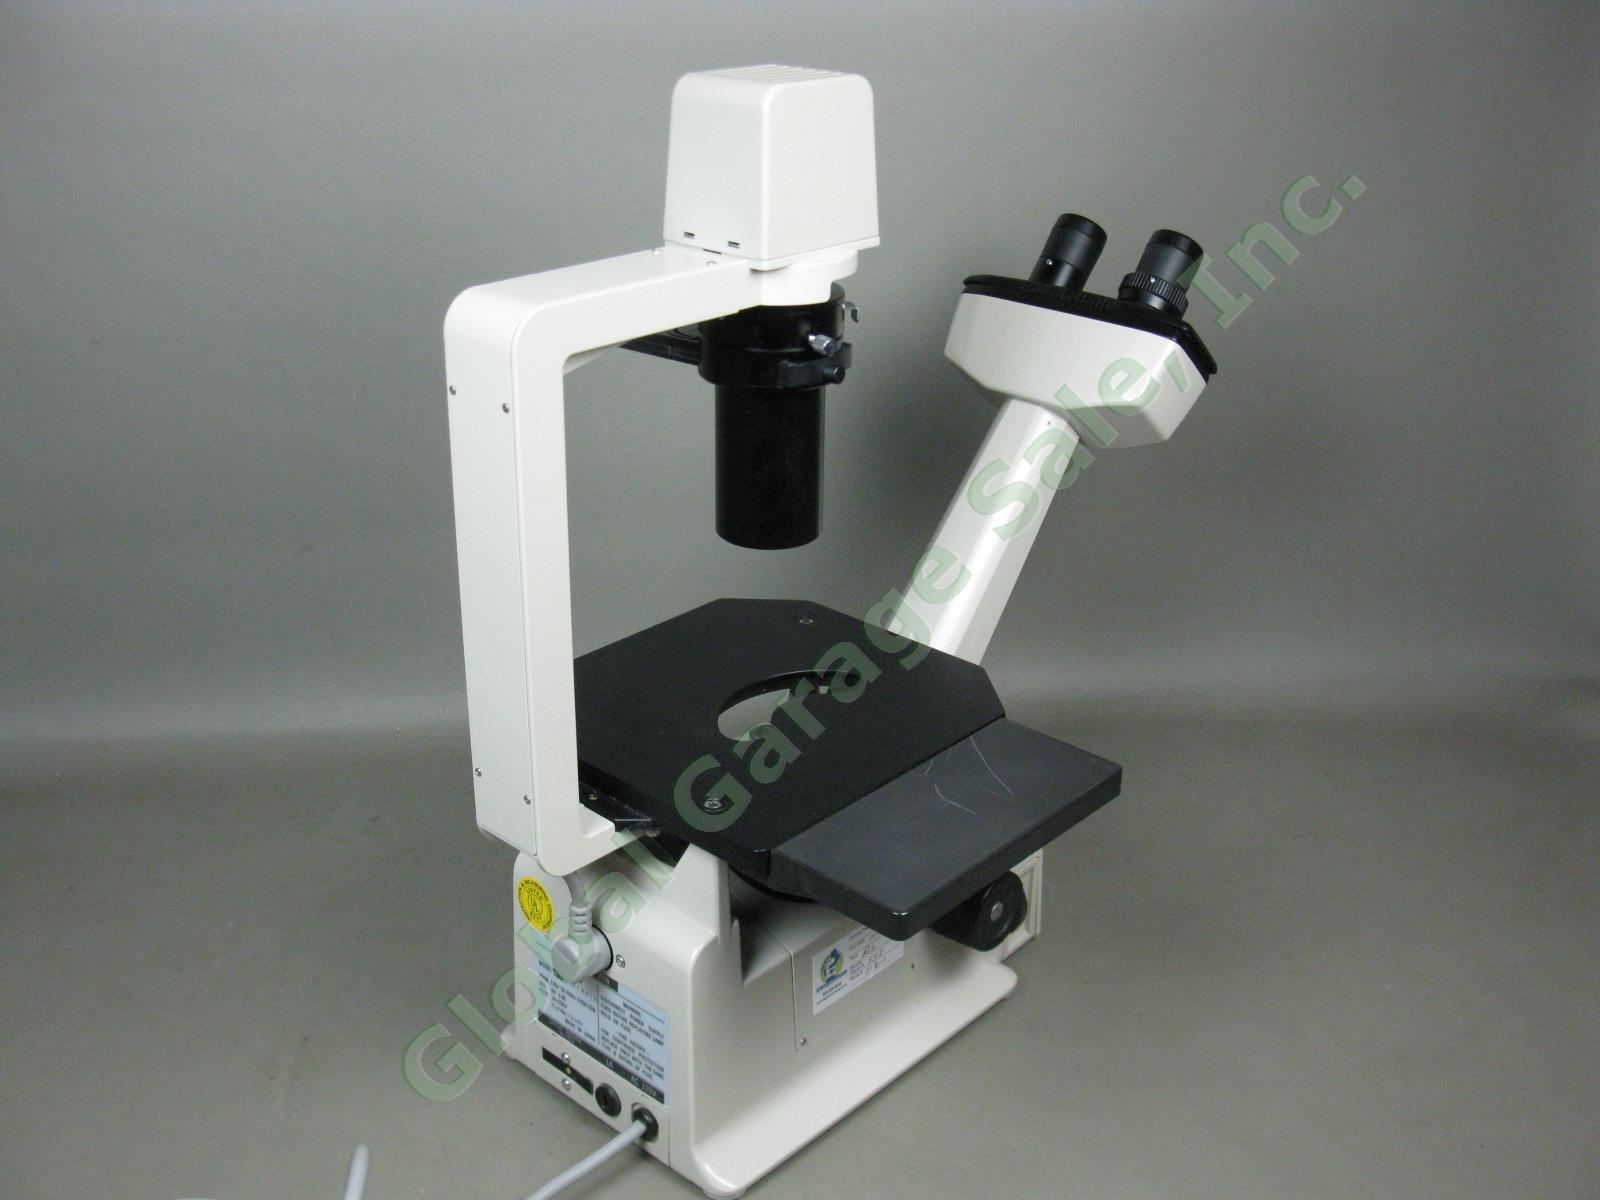 Nikon TMS Inverted Phase Contrast Microscope W/ 4 Objectives DLL 10 Ph 1-2 DL 20 4